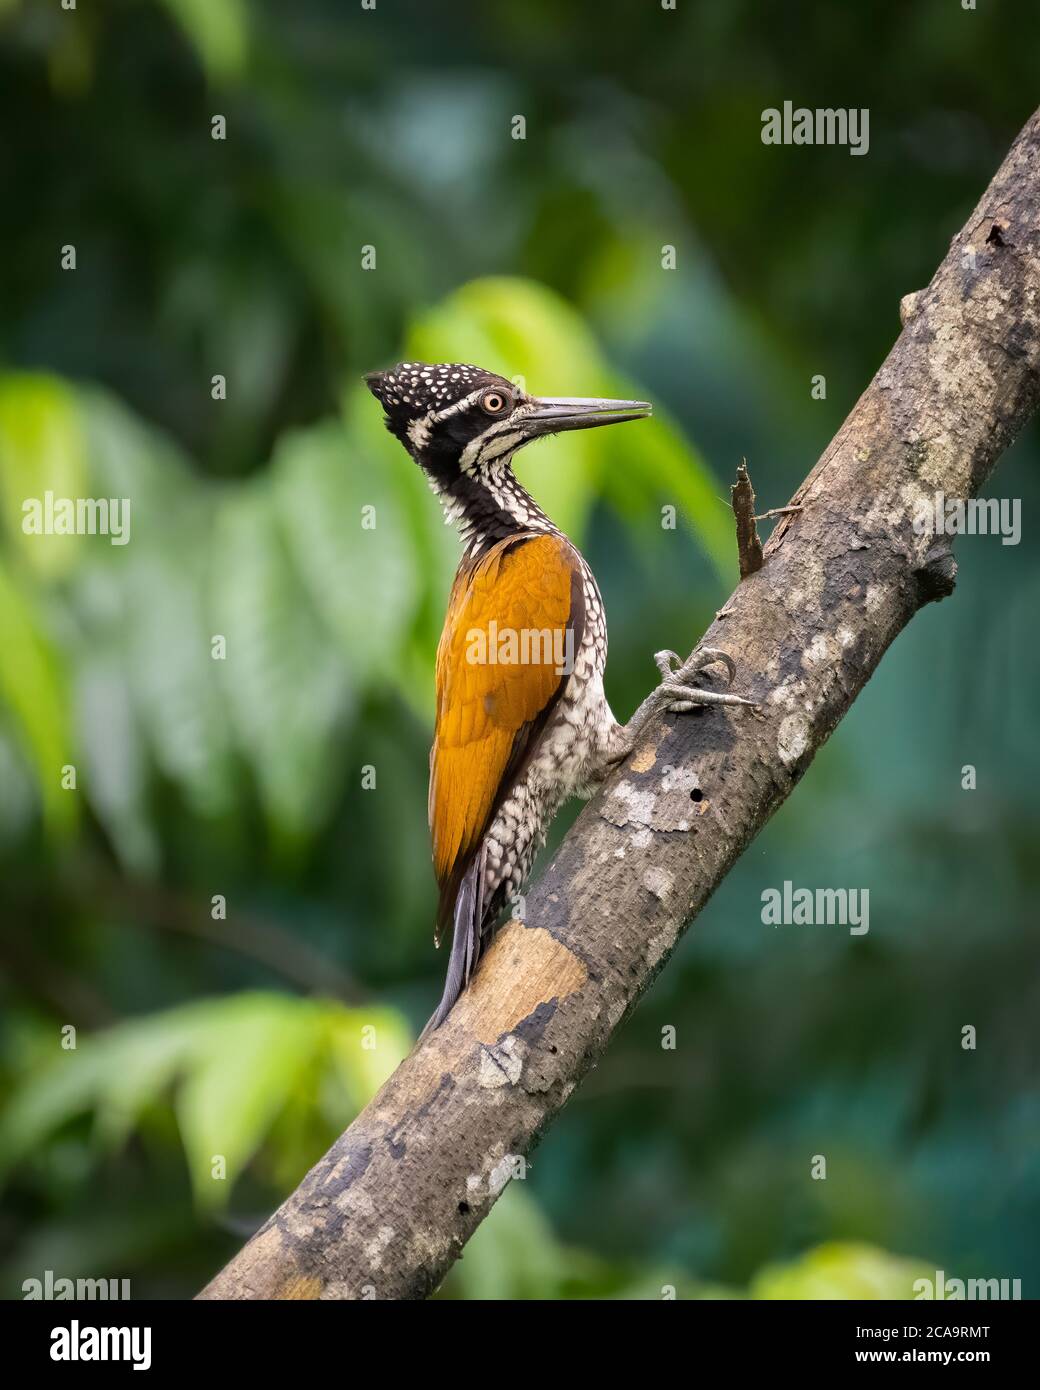 A beautiful female Greater flameback woodpecker (Chrysocolaptes guttacristatus), perched on the trunk of a dead tree in Karnataka, India Stock Photo